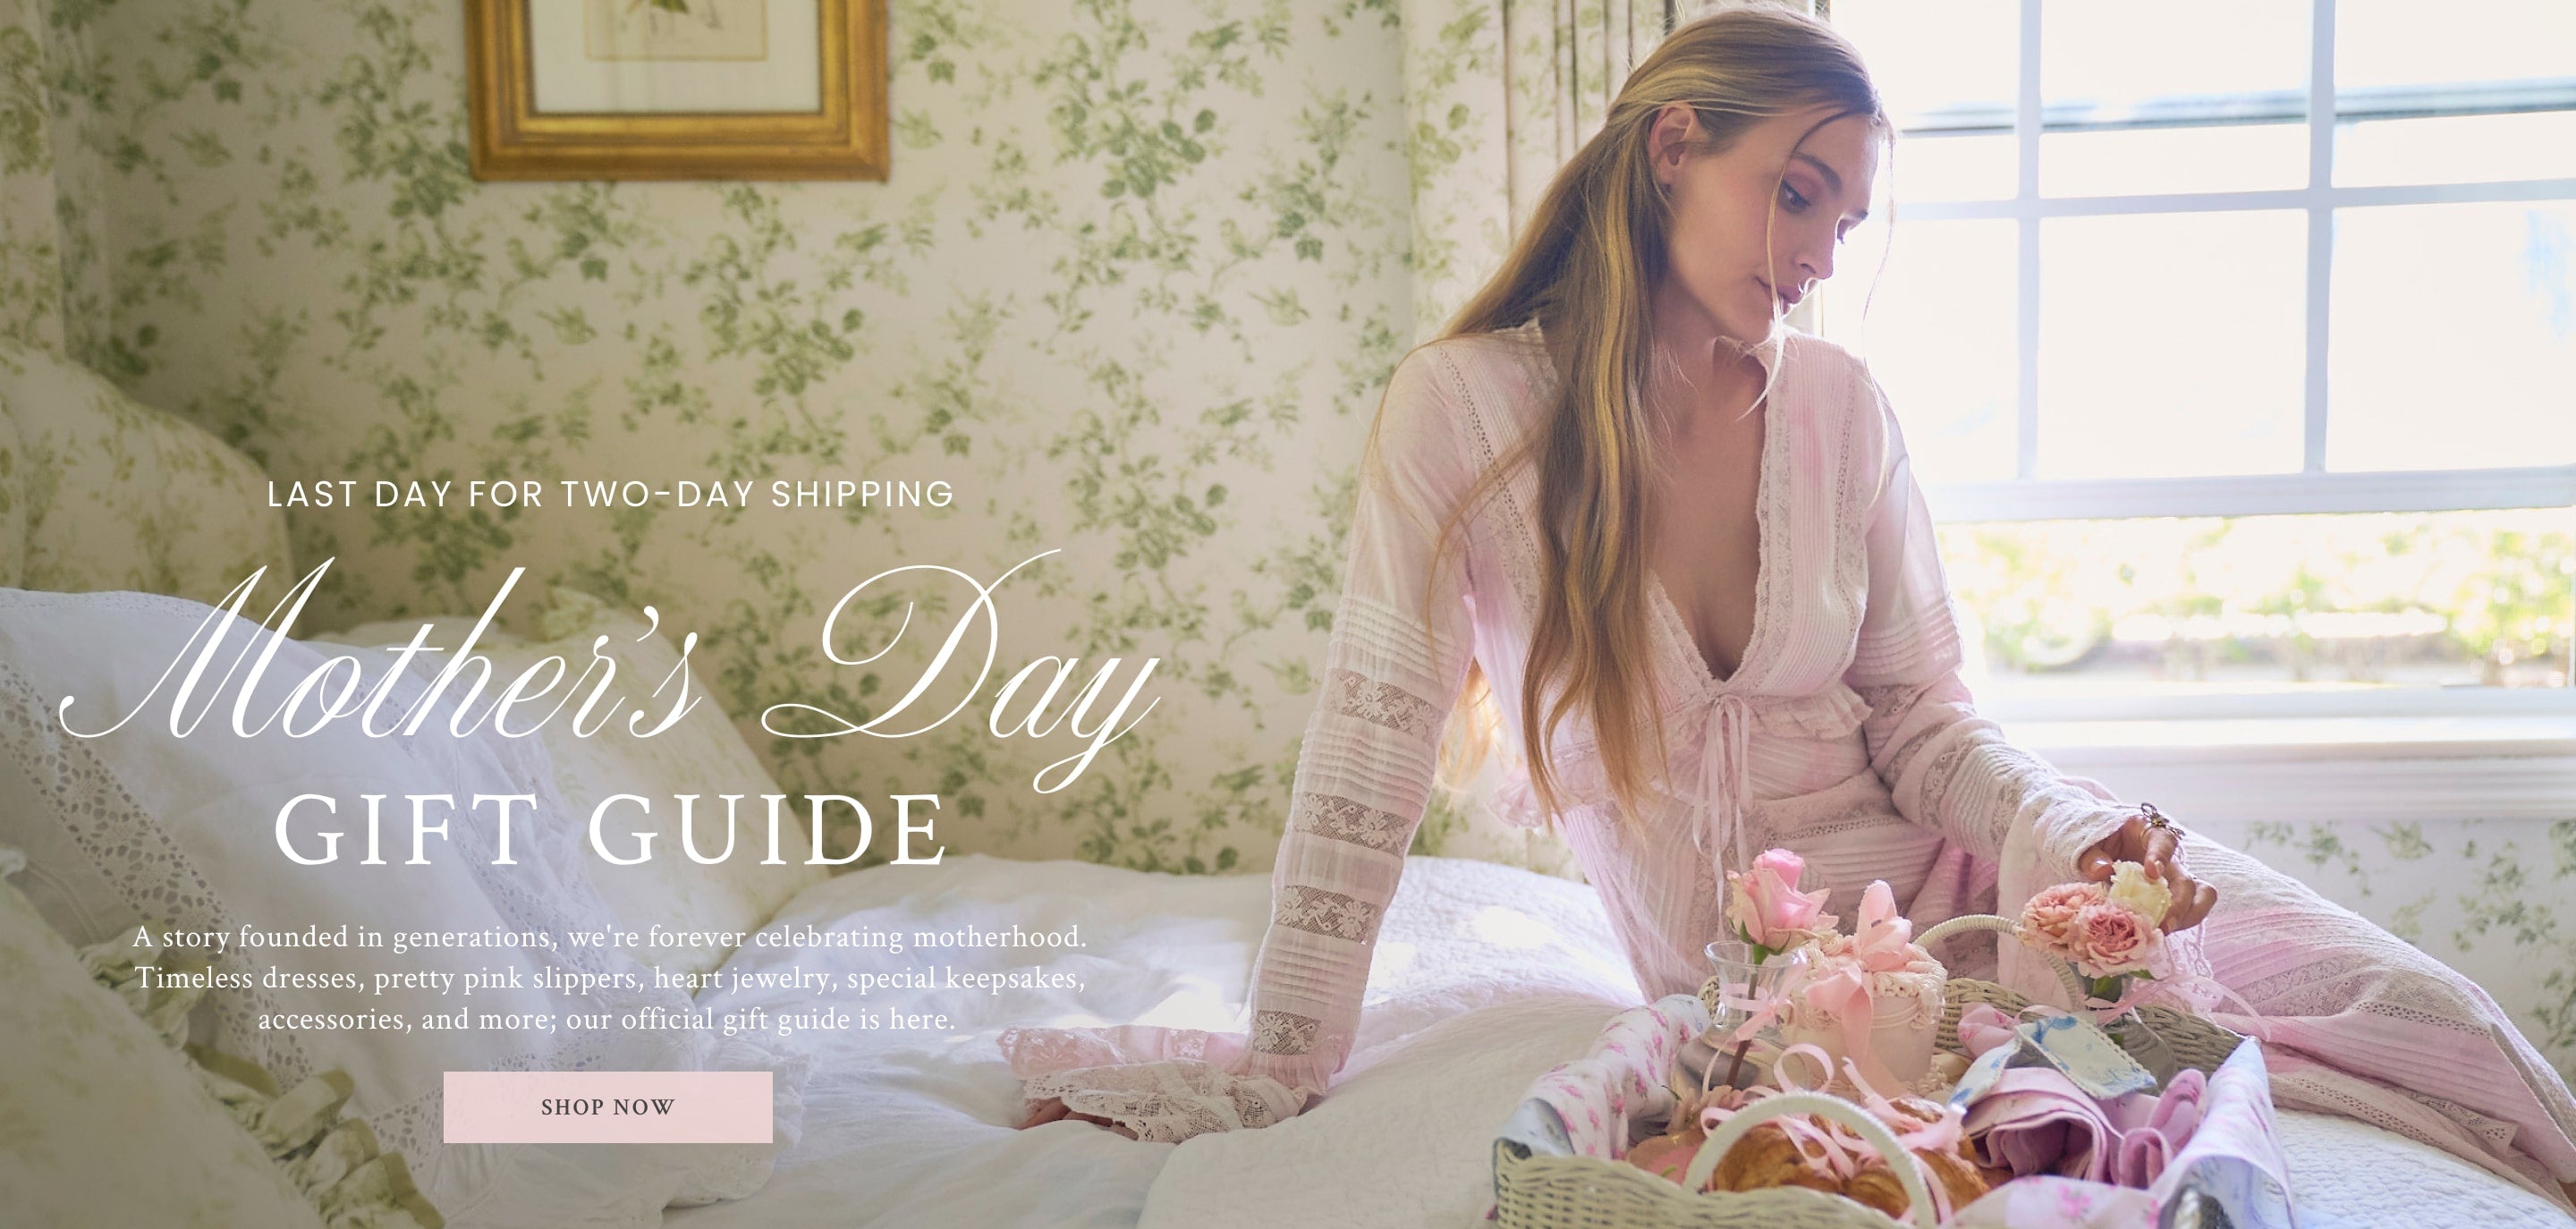 Shop our Mother's Day Gift Guide. We are donating 10% of sales online and in-stores from today through Mother's day, 5/12 to help Baby2Baby.